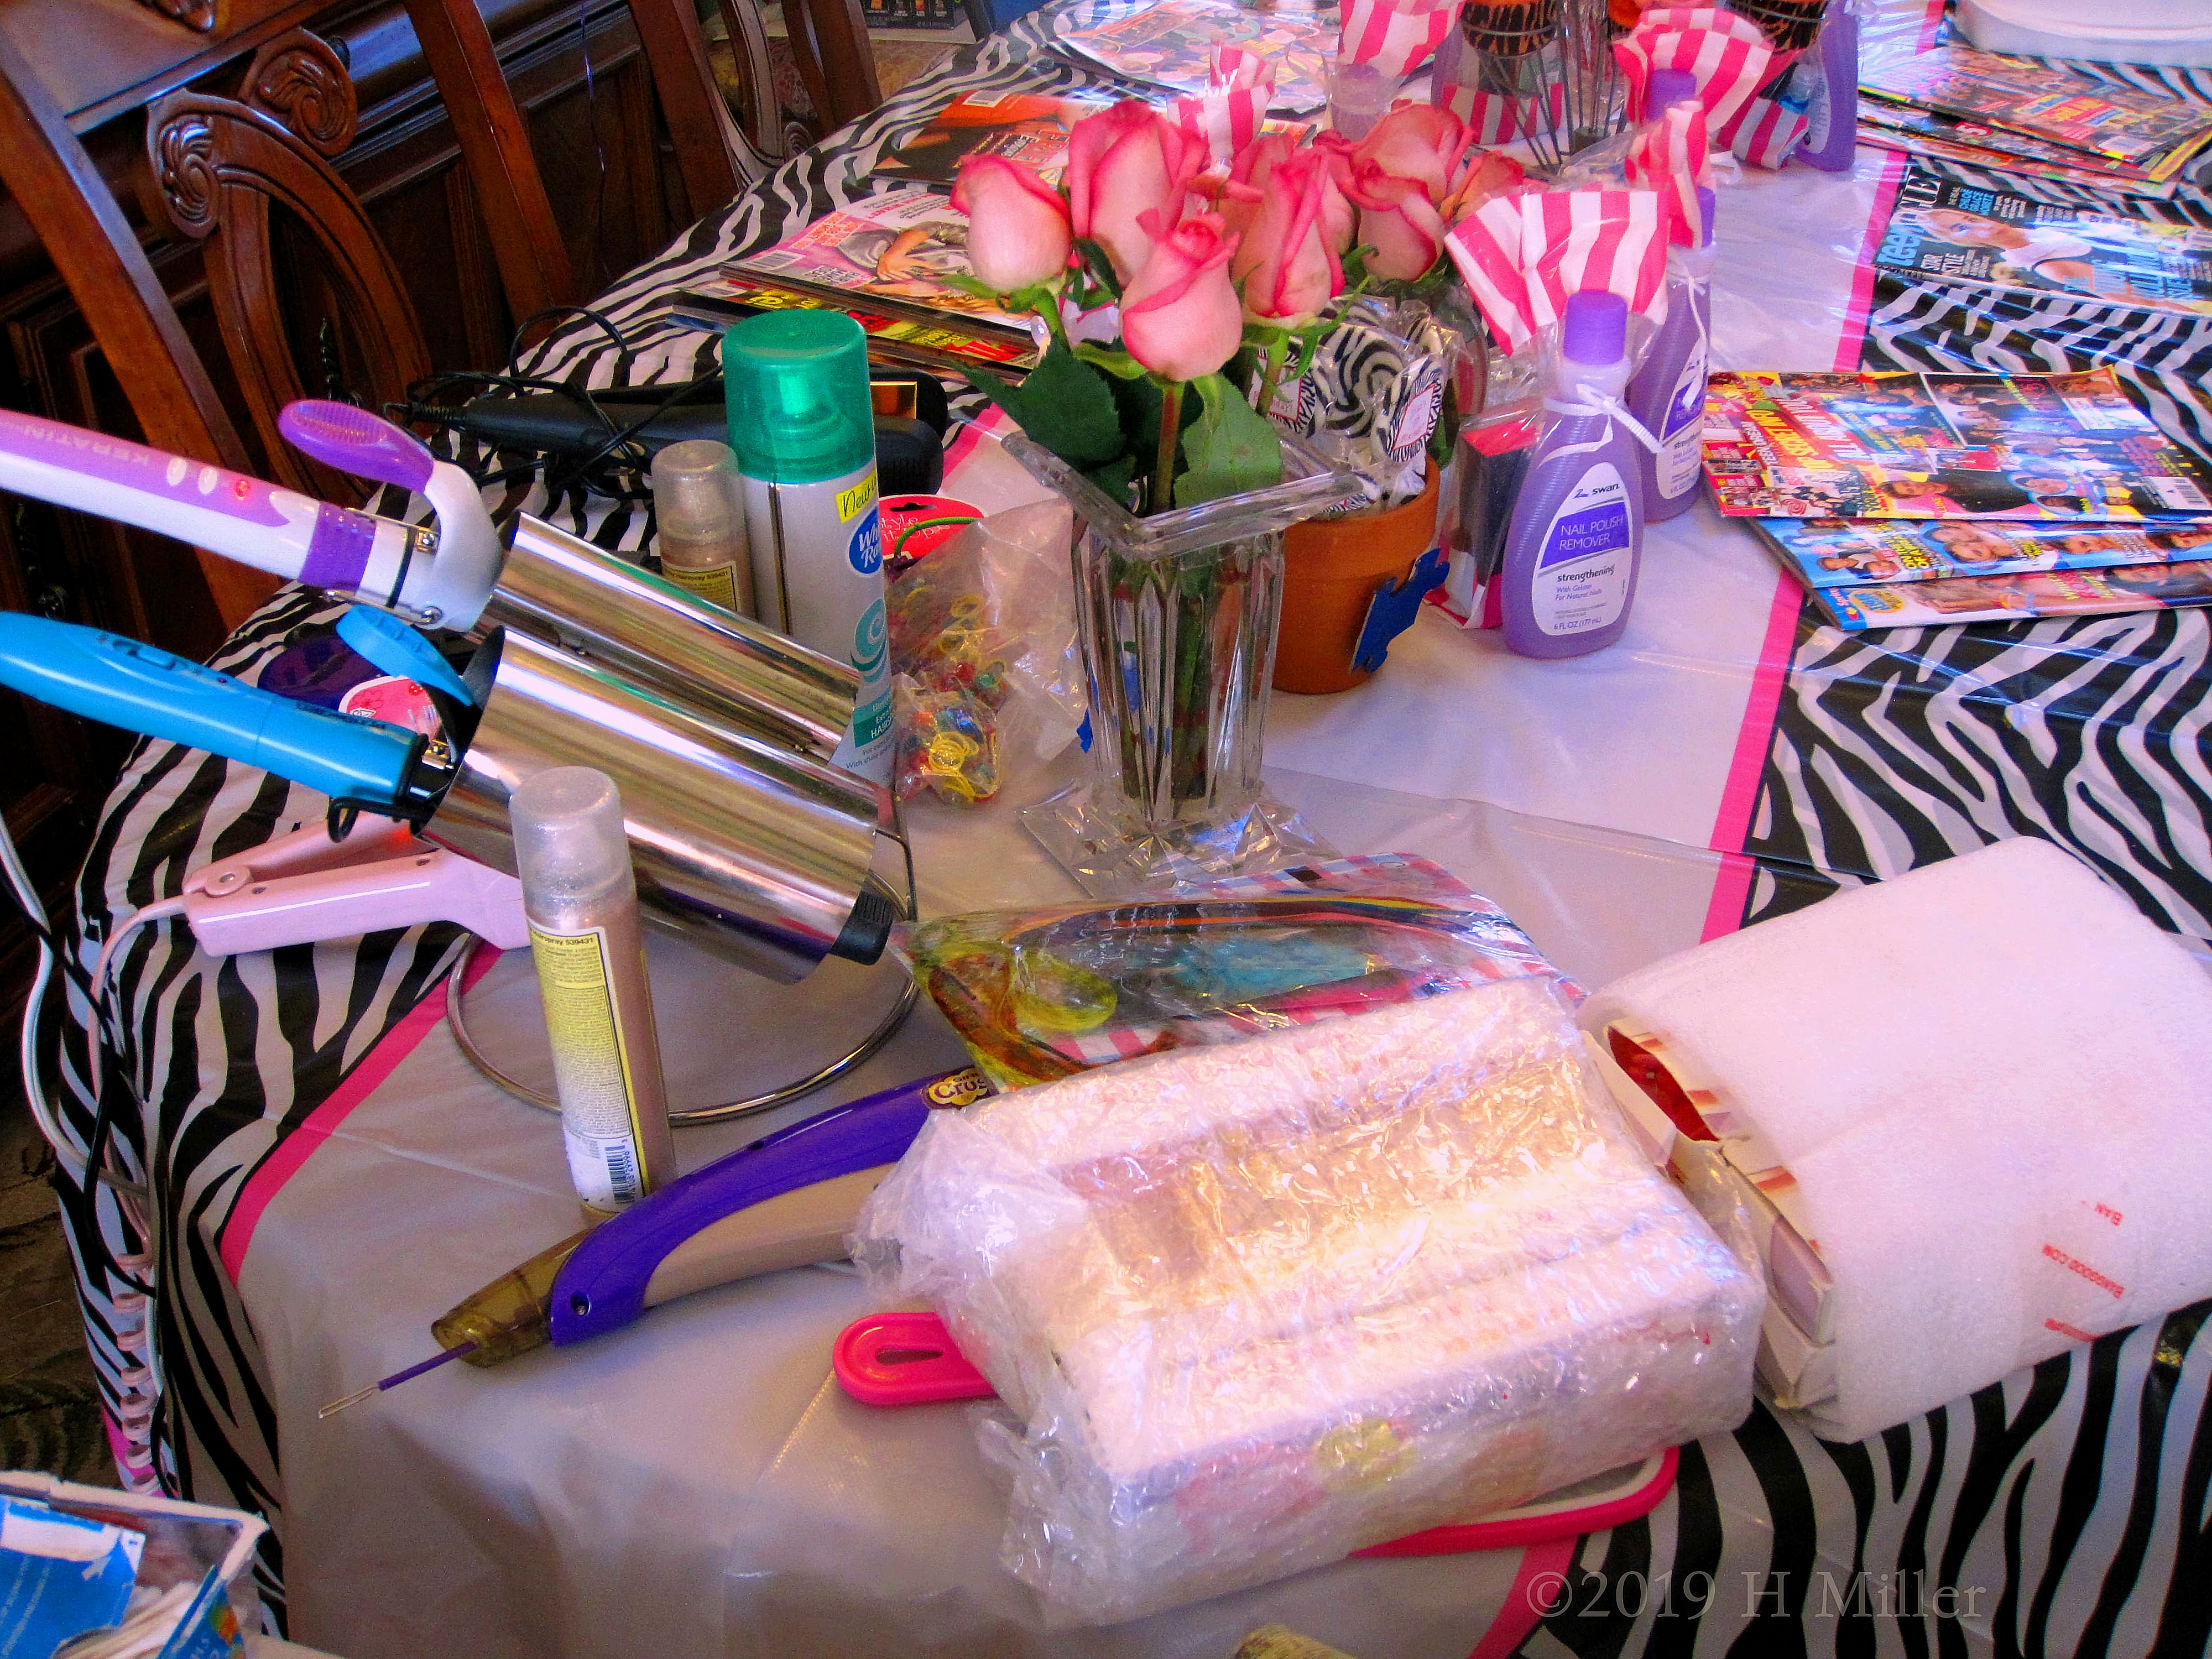 Kids Spa Party For Jillian In New Jersey In October 2014 Gallery 1